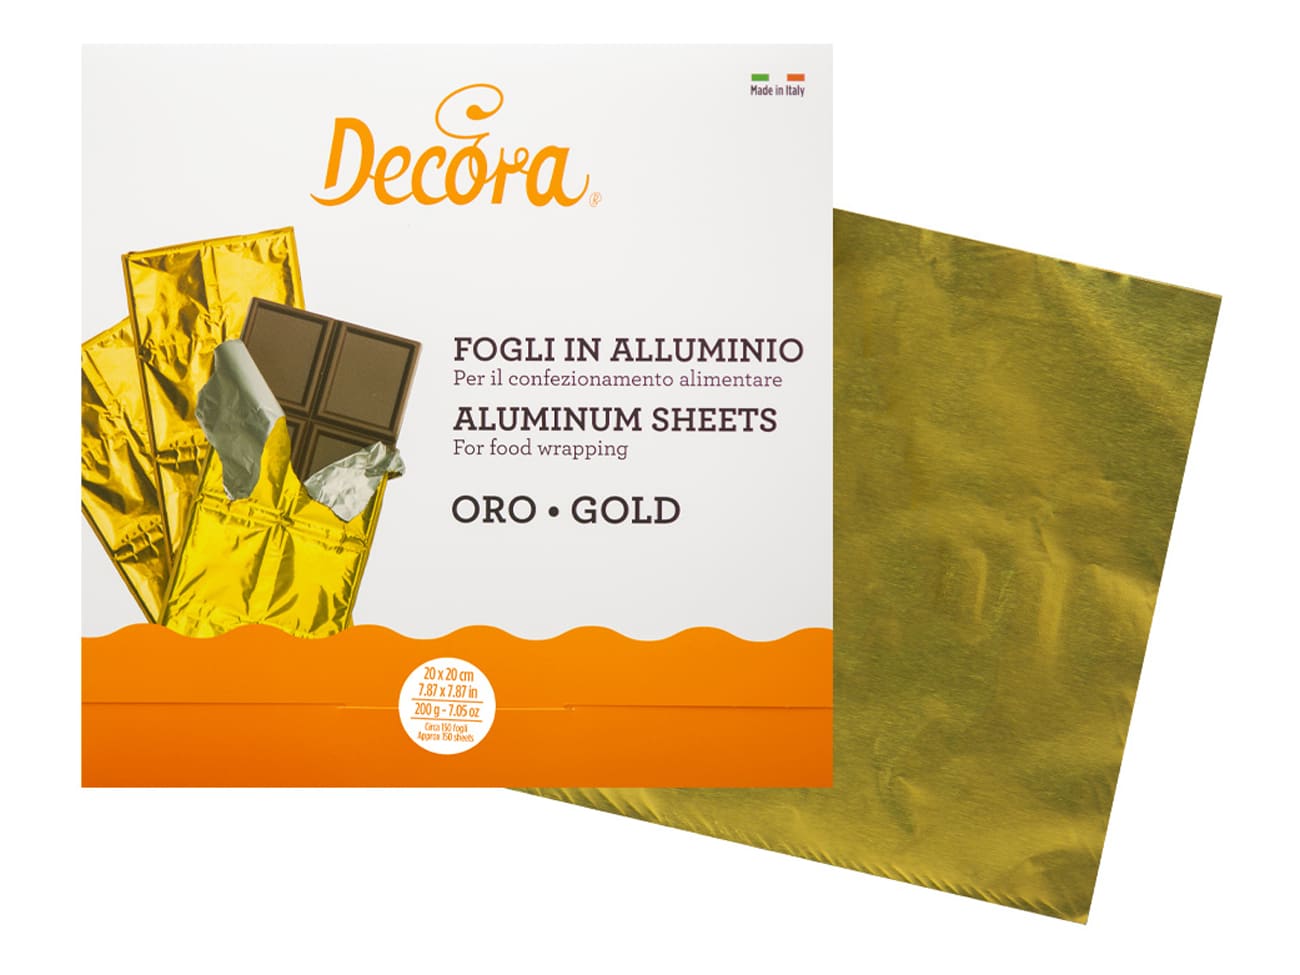 Feuille d'or comestible - Decora